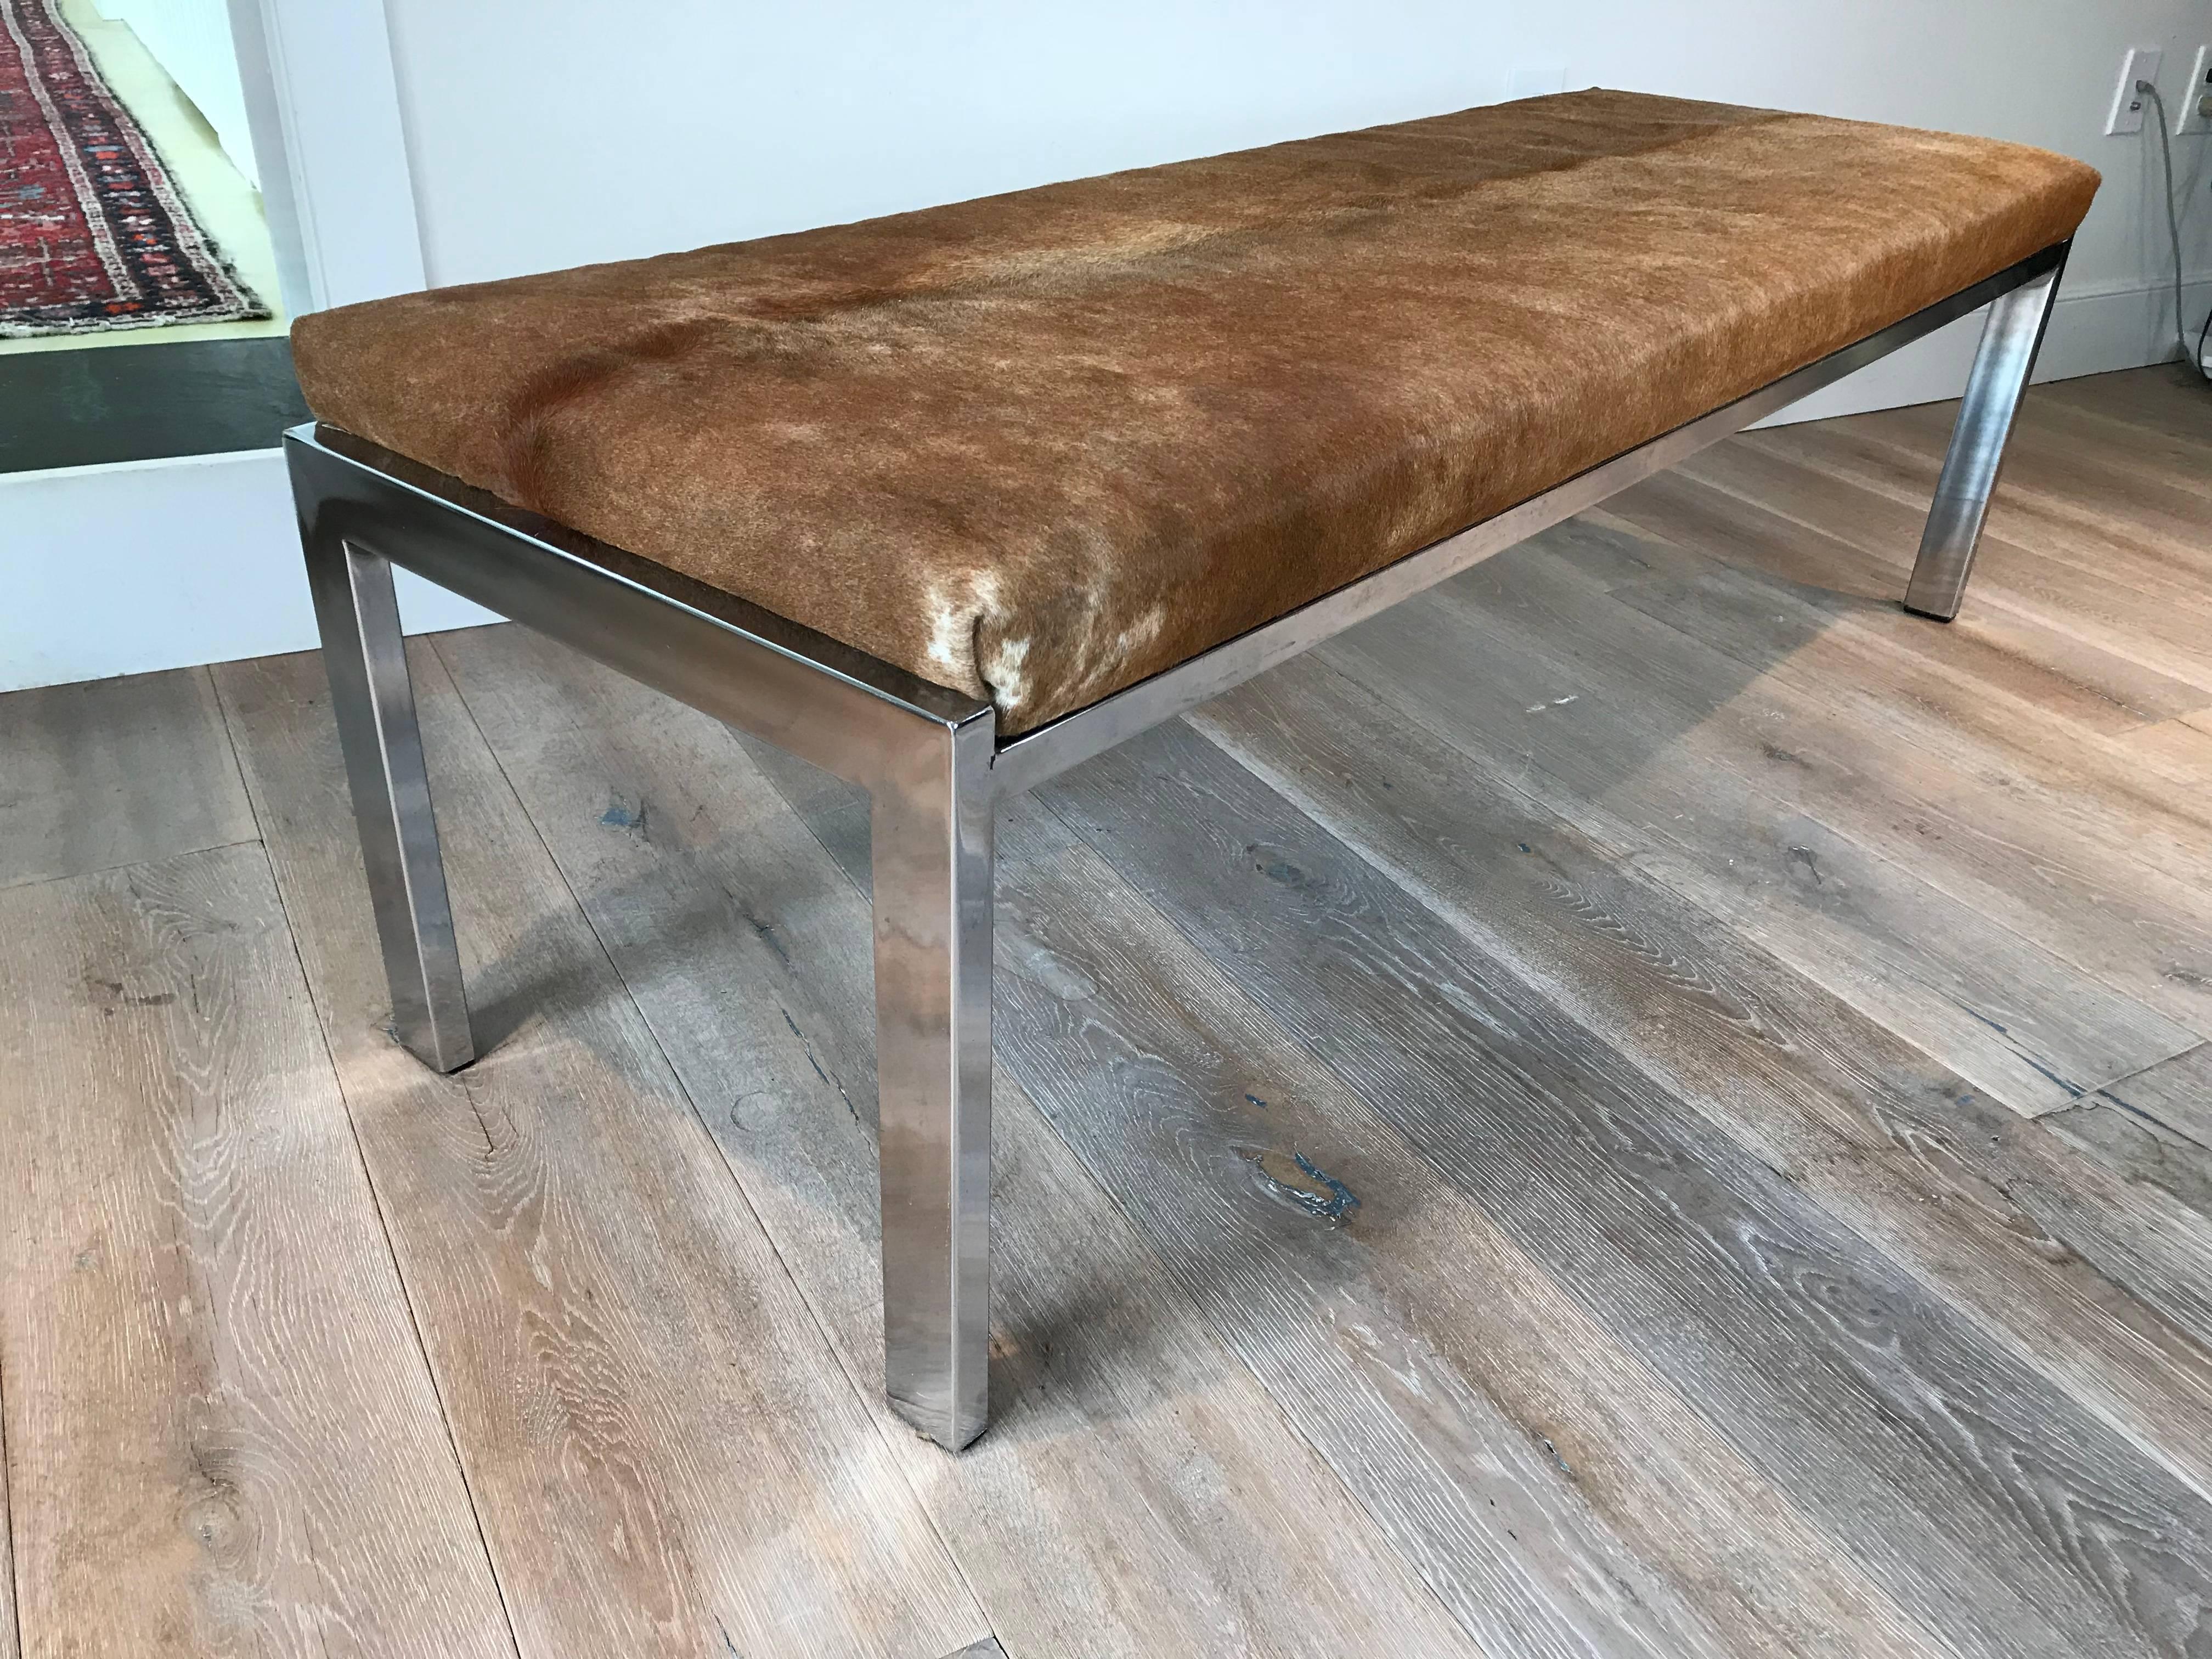 A long chrome bench with tan cowhide upholstery by Milo Baughman.